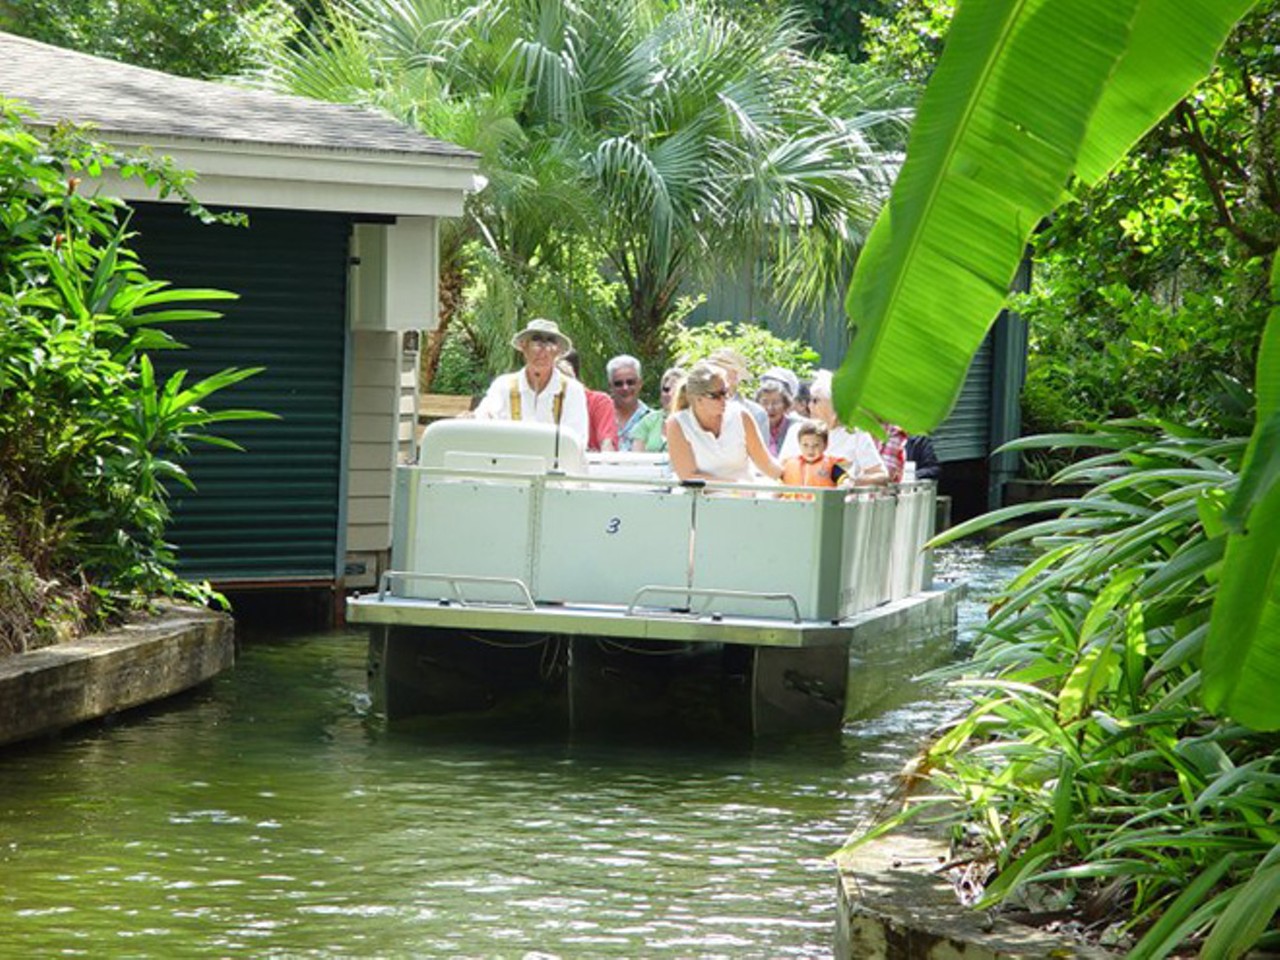 Boat through the canals of Winter Park
312 E. Morse Blvd.; 407-644-4056; scenicboattours.com
"Take the Winter Park Scenic Boat Tour, which takes you through an amazing series of lush, narrow canals that connect the Winter Park Chain of Lakes. If you've ever wondered whether this tour was worth checking out, the answer is yes &#150; do it."
Photo via scenicboattours.com